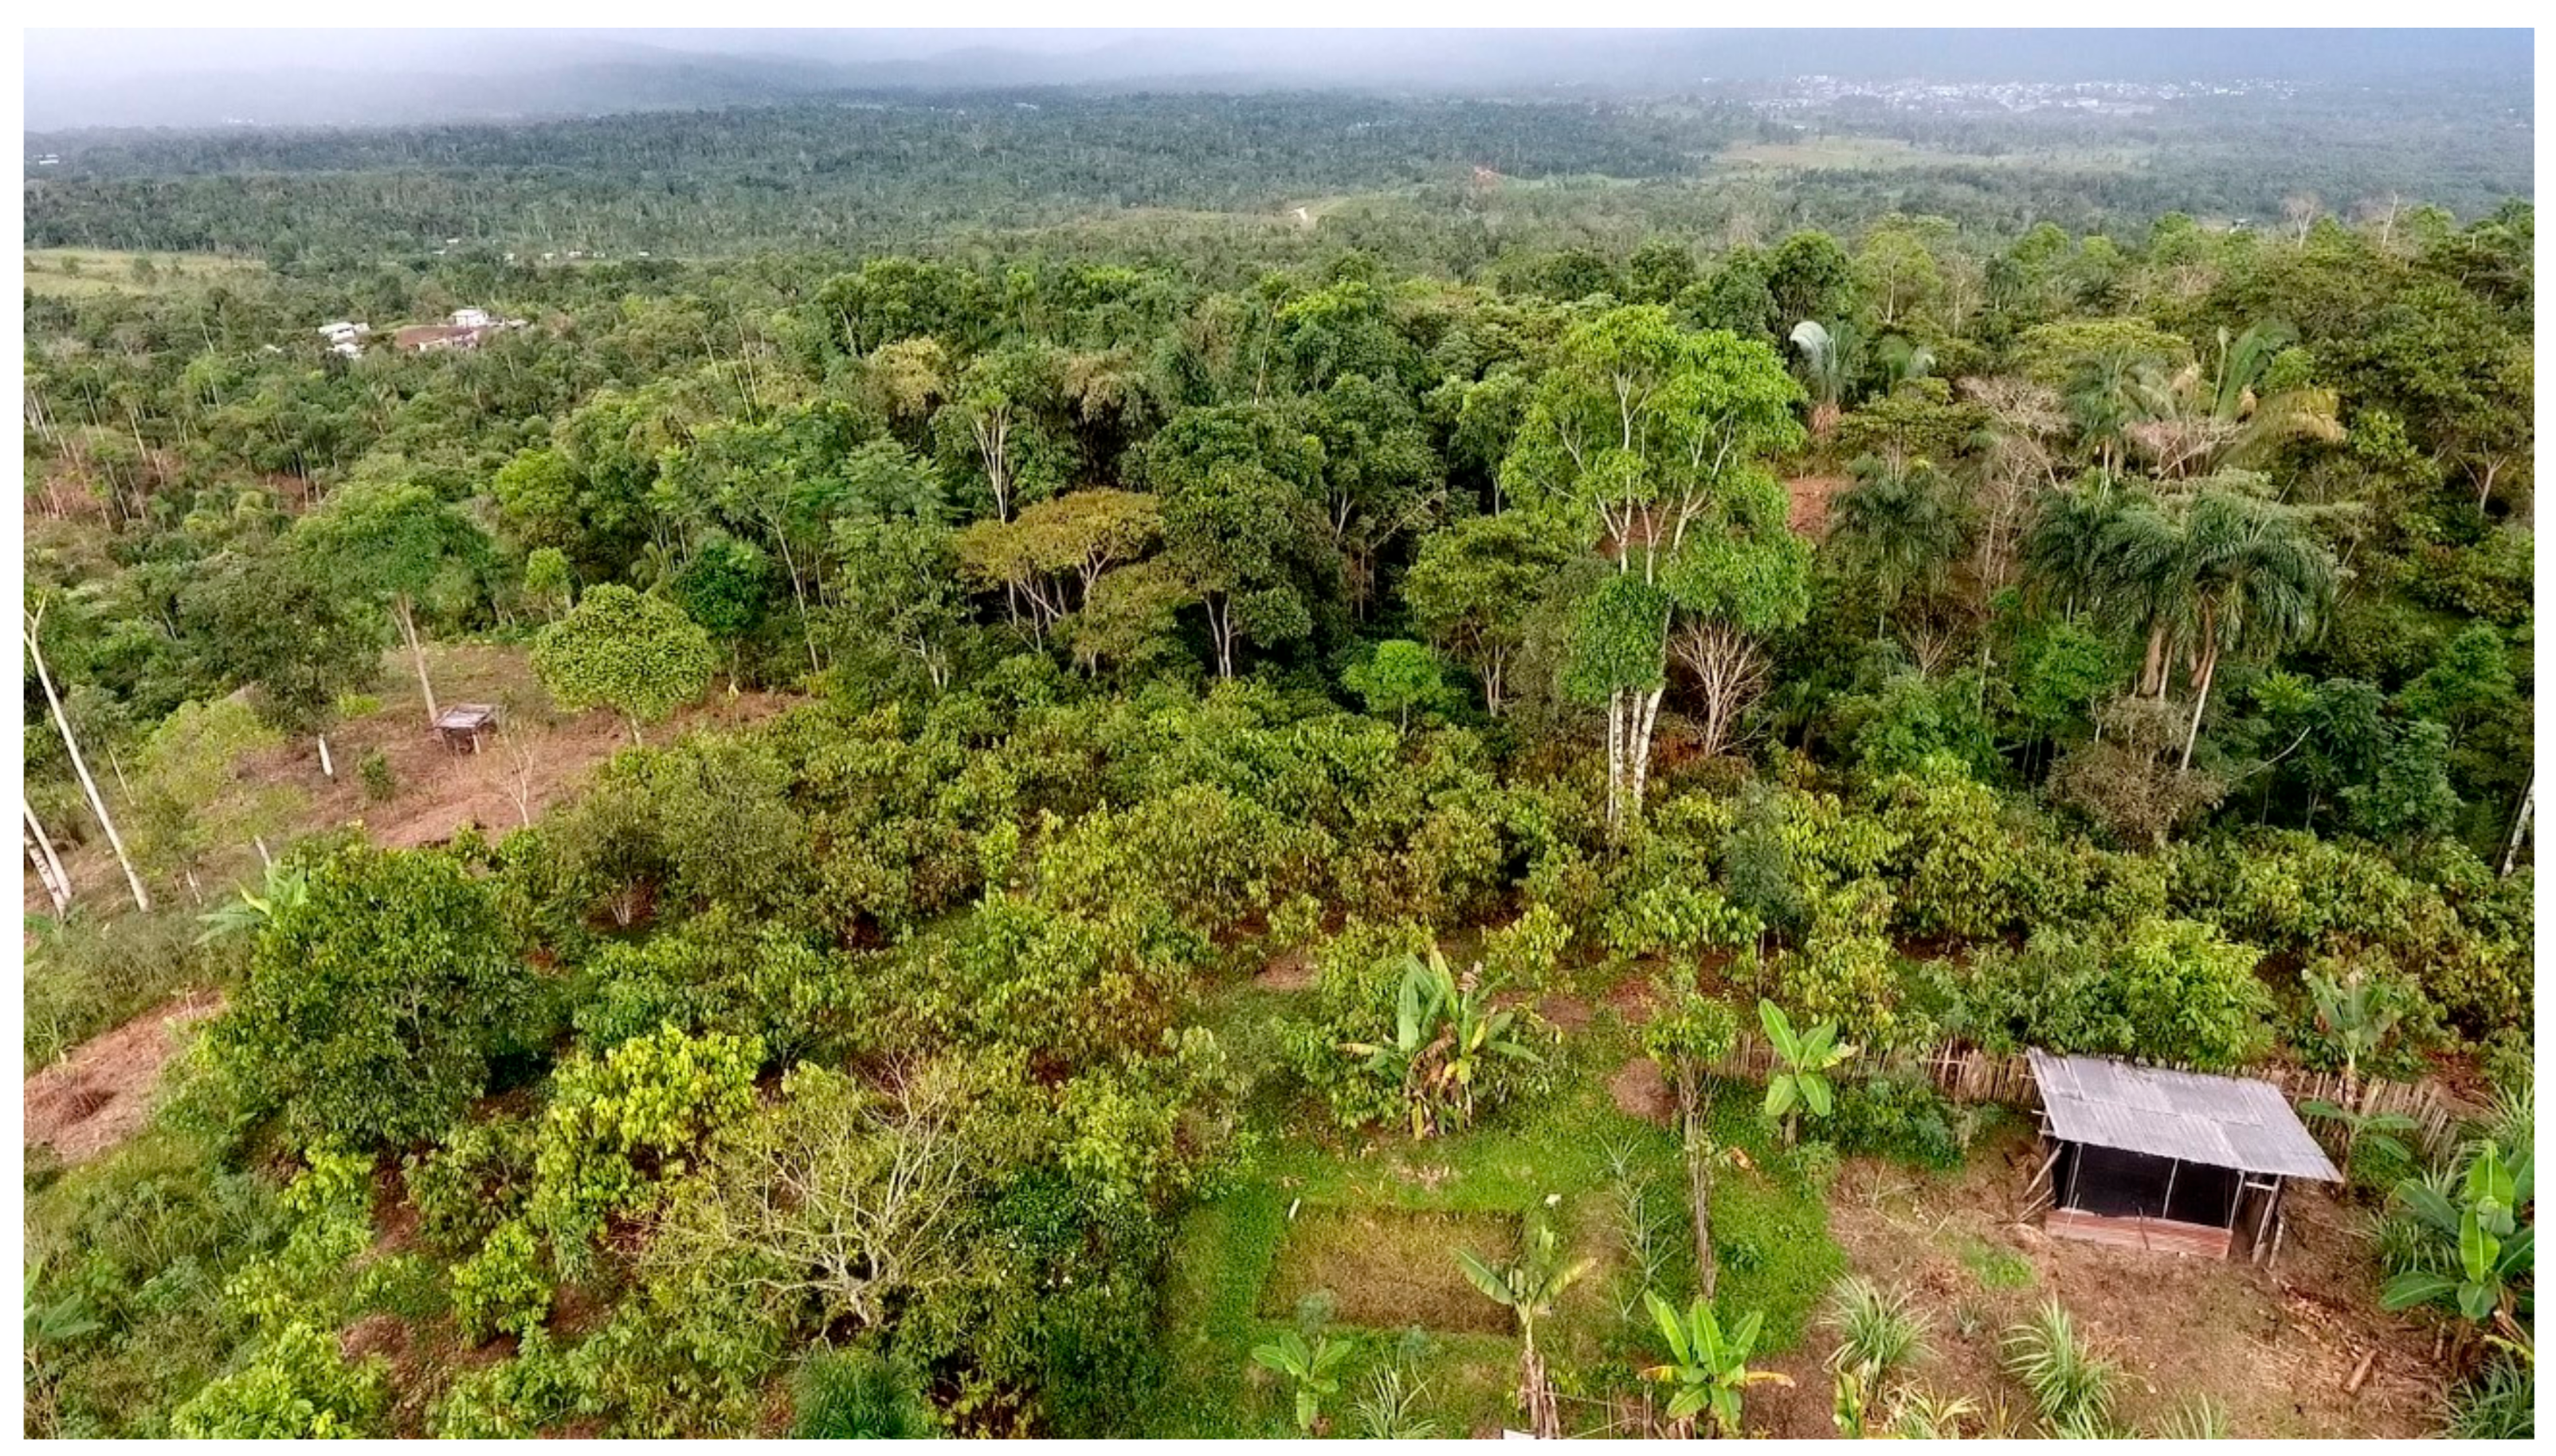 Sustainability | Free Full-Text | Determinants of Agricultural  Diversification in a Hotspot Area: Evidence from Colonist and Indigenous  Communities in the Sumaco Biosphere Reserve, Ecuadorian Amazon | HTML